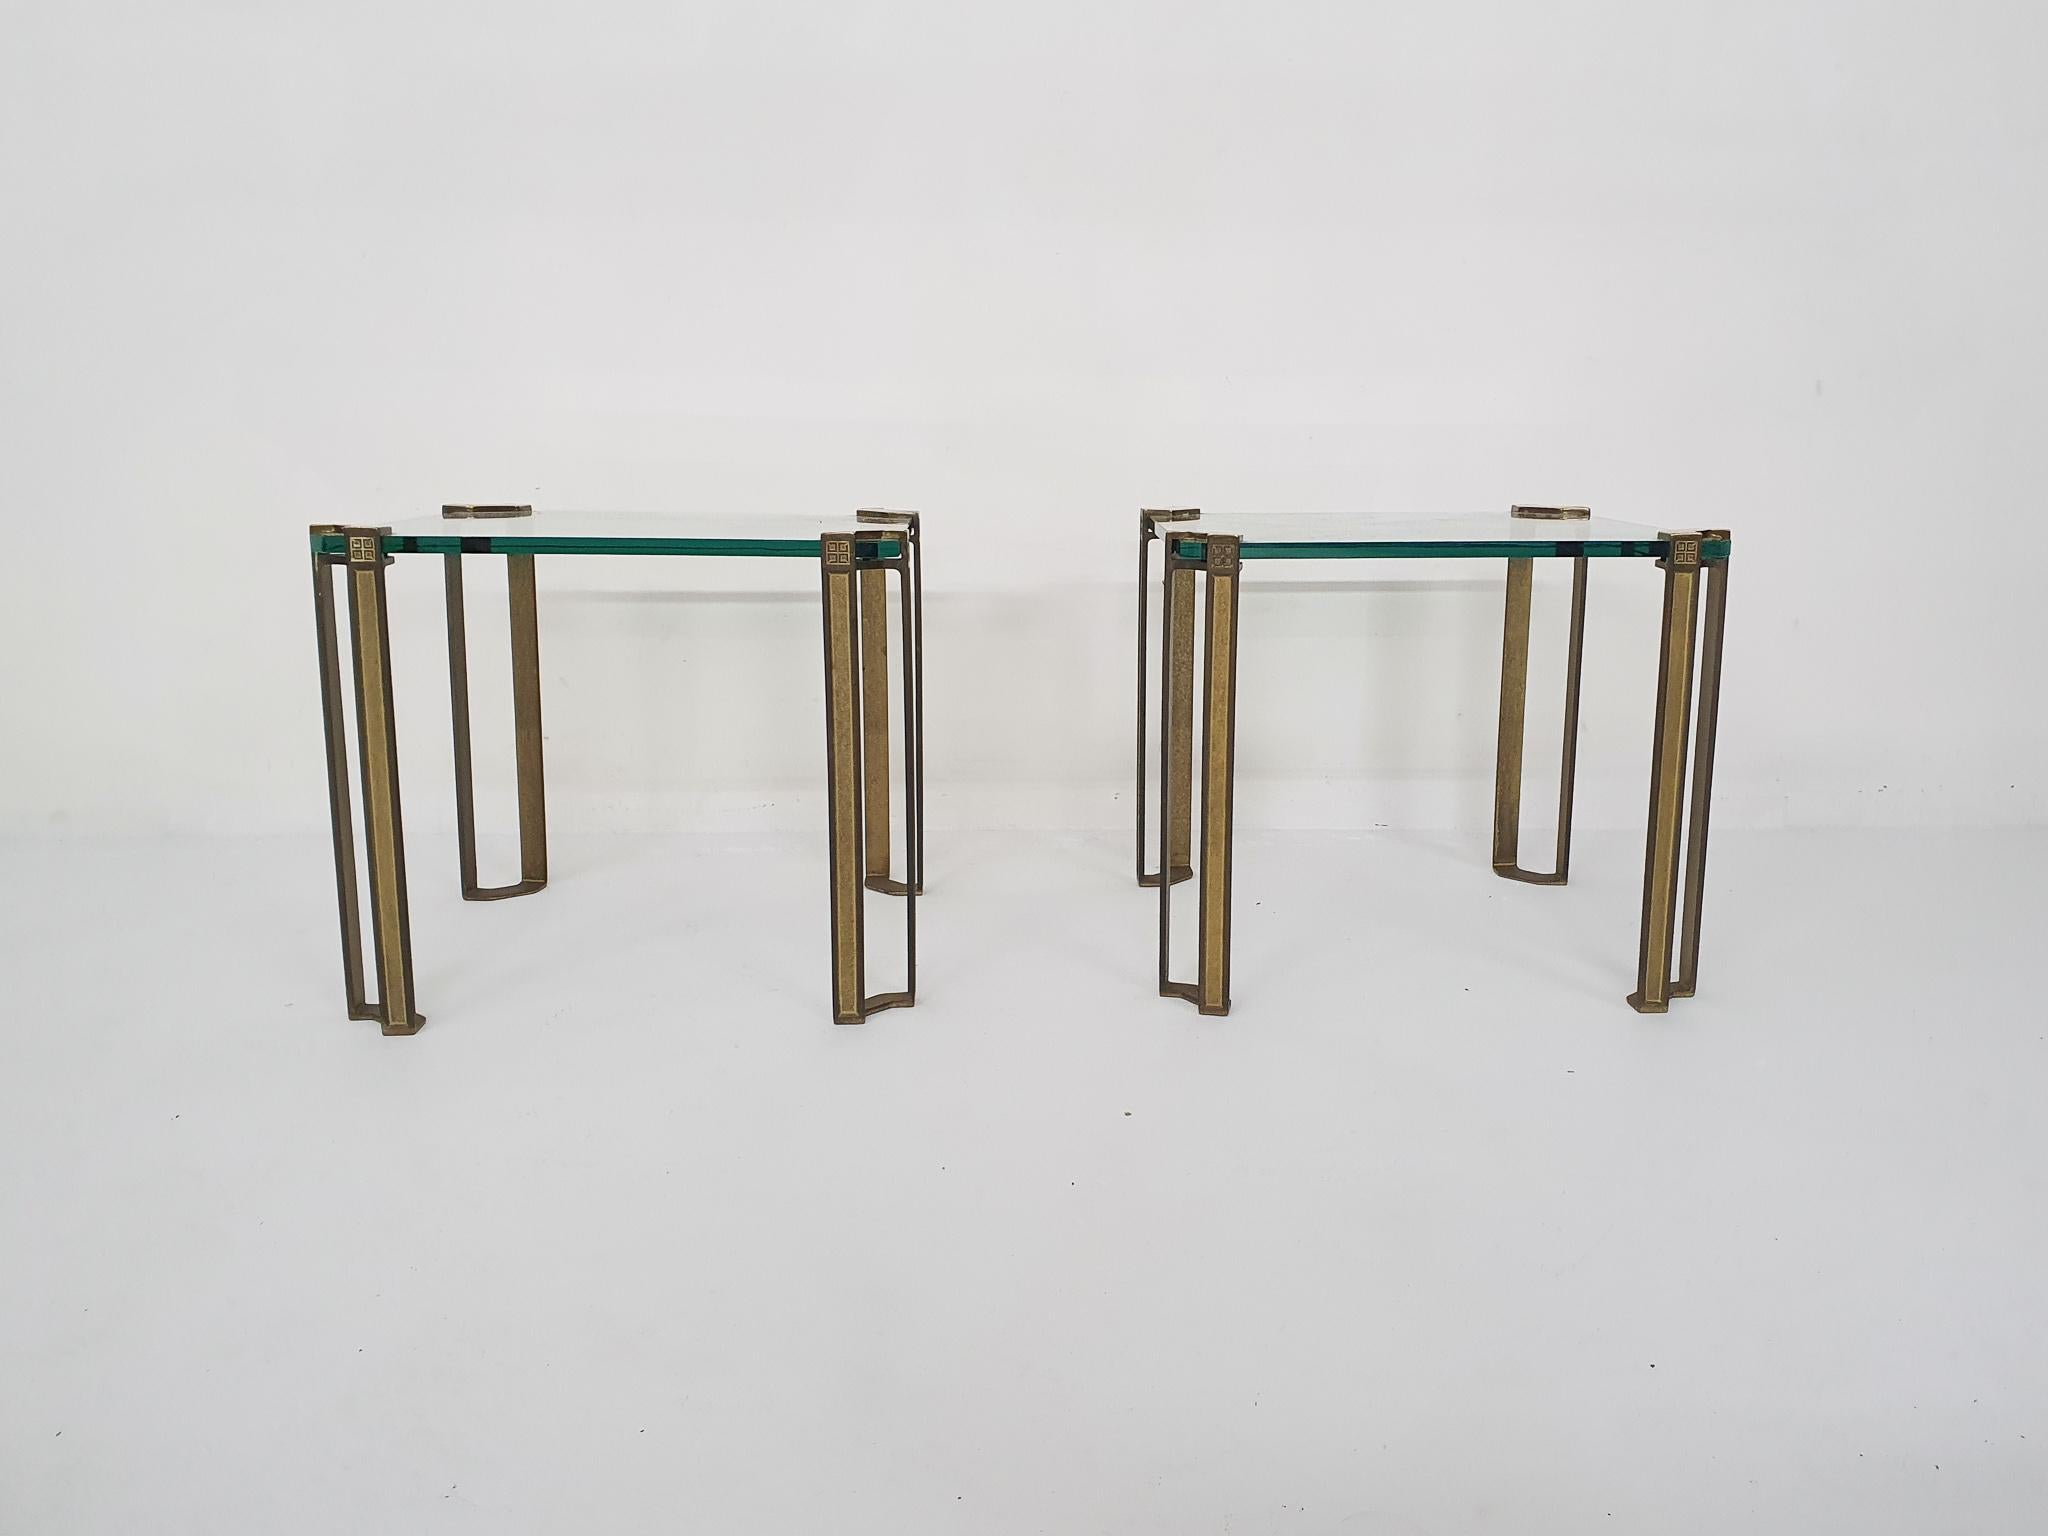 Set of two side table. Brass legs and glass top. In good condition.
Architect and designer Peter Ghyczy, born in Hungary in 1940, graduated at the Technical University of Aachen. His most successful design was the Garden Egg Chair in 1968 for